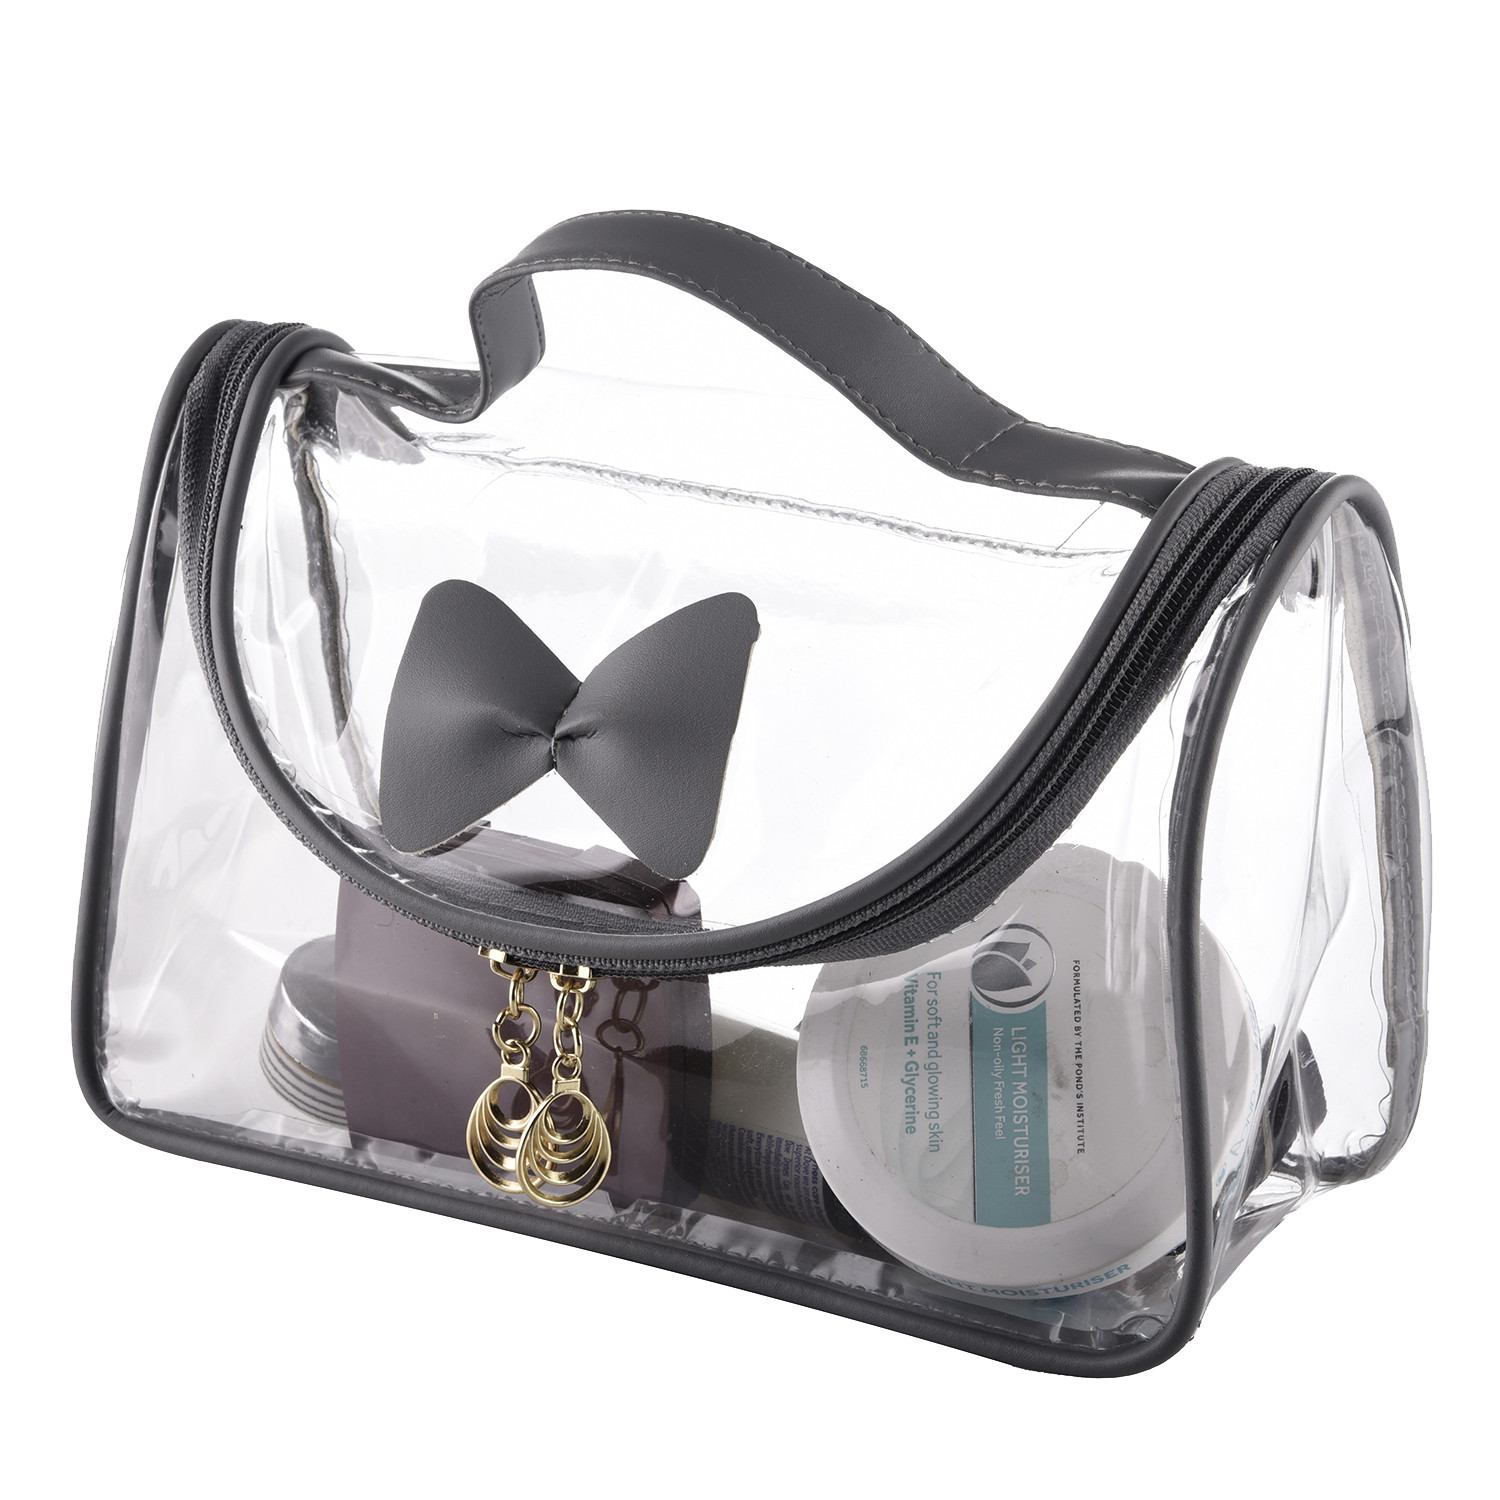 Kuber Industries Toiletry Kit|PVC Bow Design U Shape Chain Makeup Pouch for Woman|Transparent Waterproof Cosmetic Organizor with 30 mm Handle (Gray)